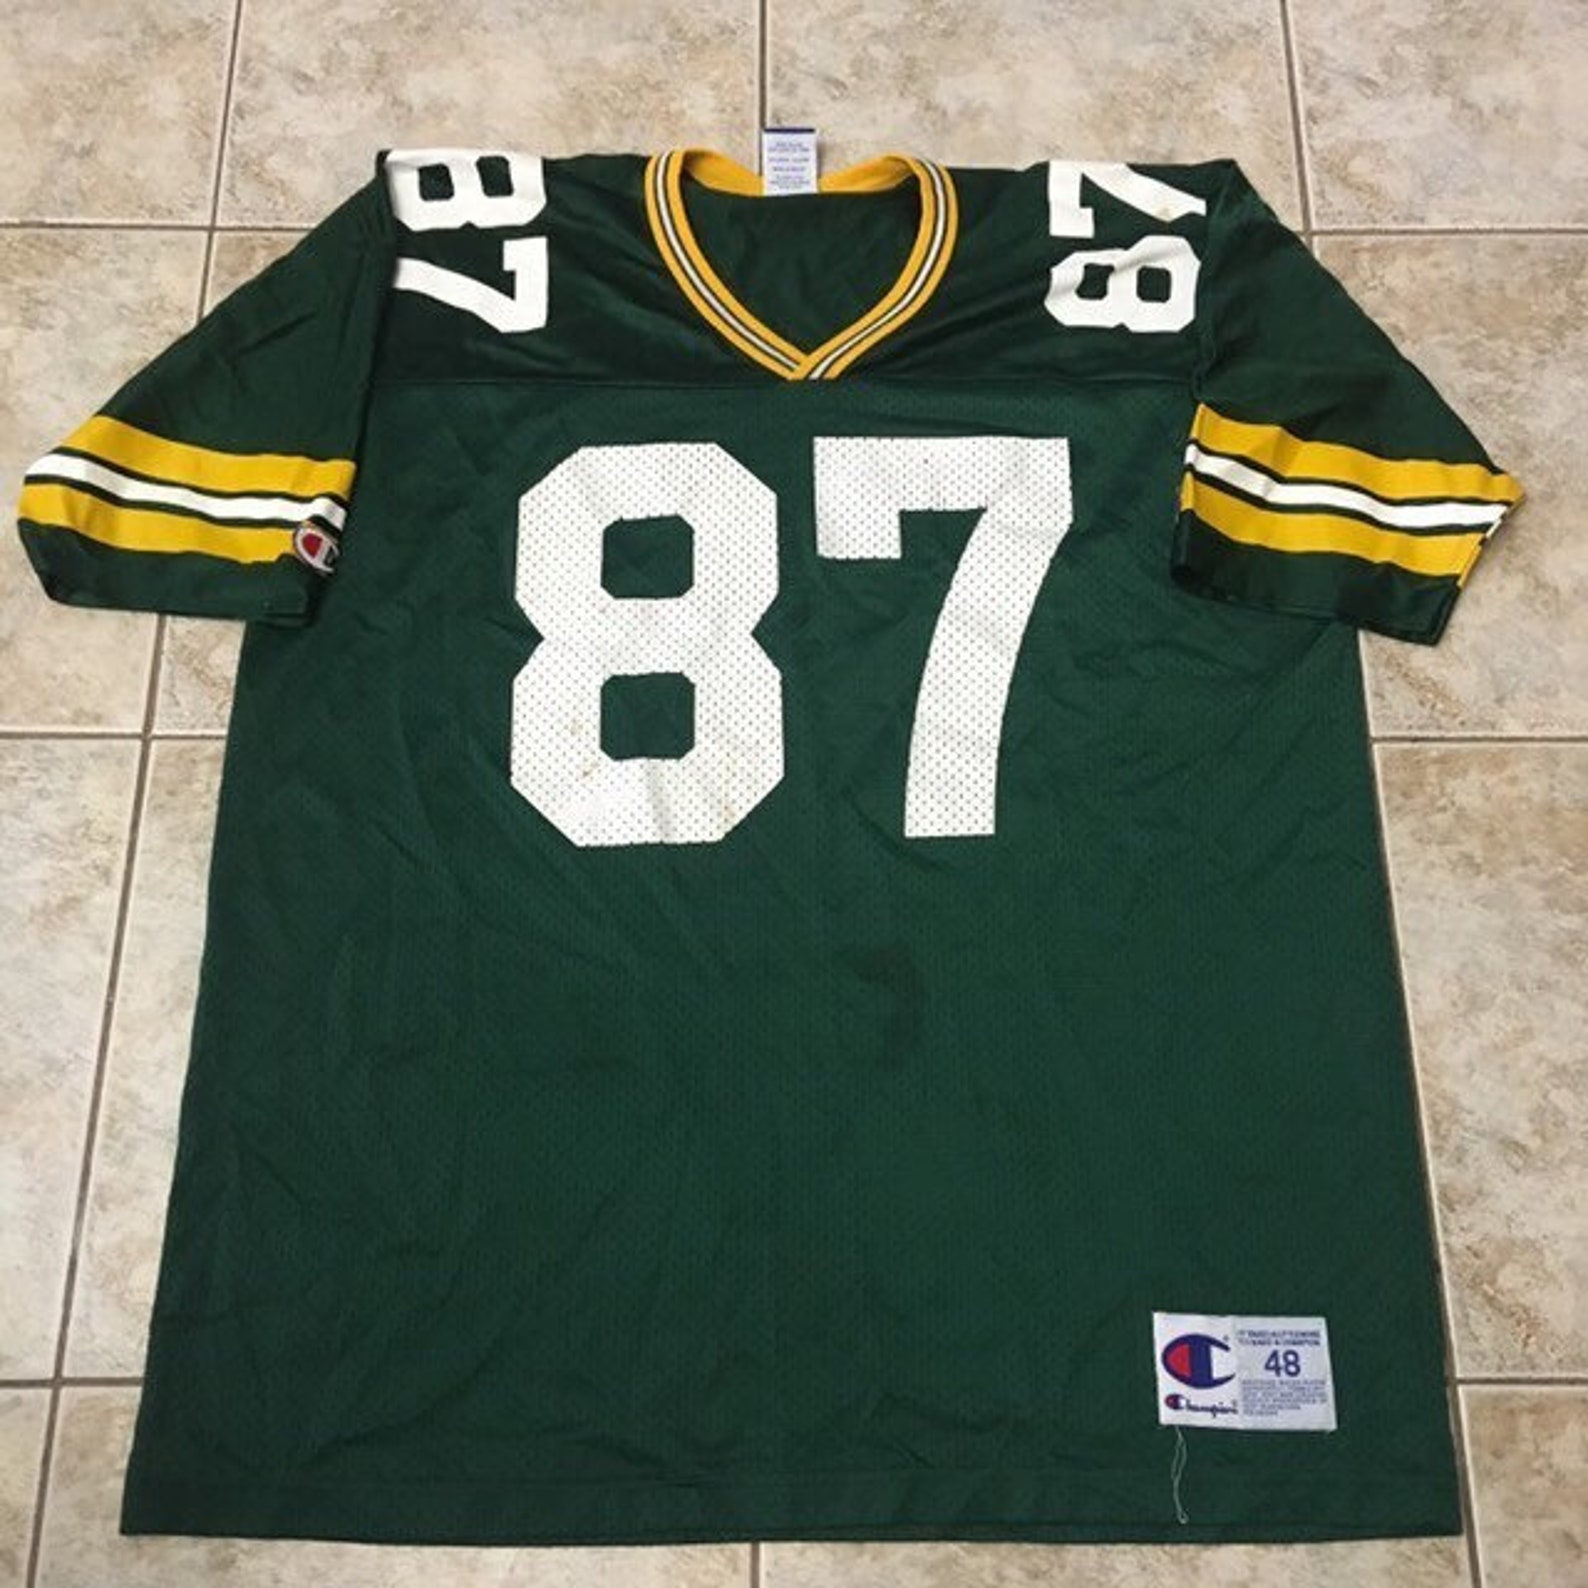 Vintage Green Bay Packers Football Jersey Size 48 XL 87 - Etsy